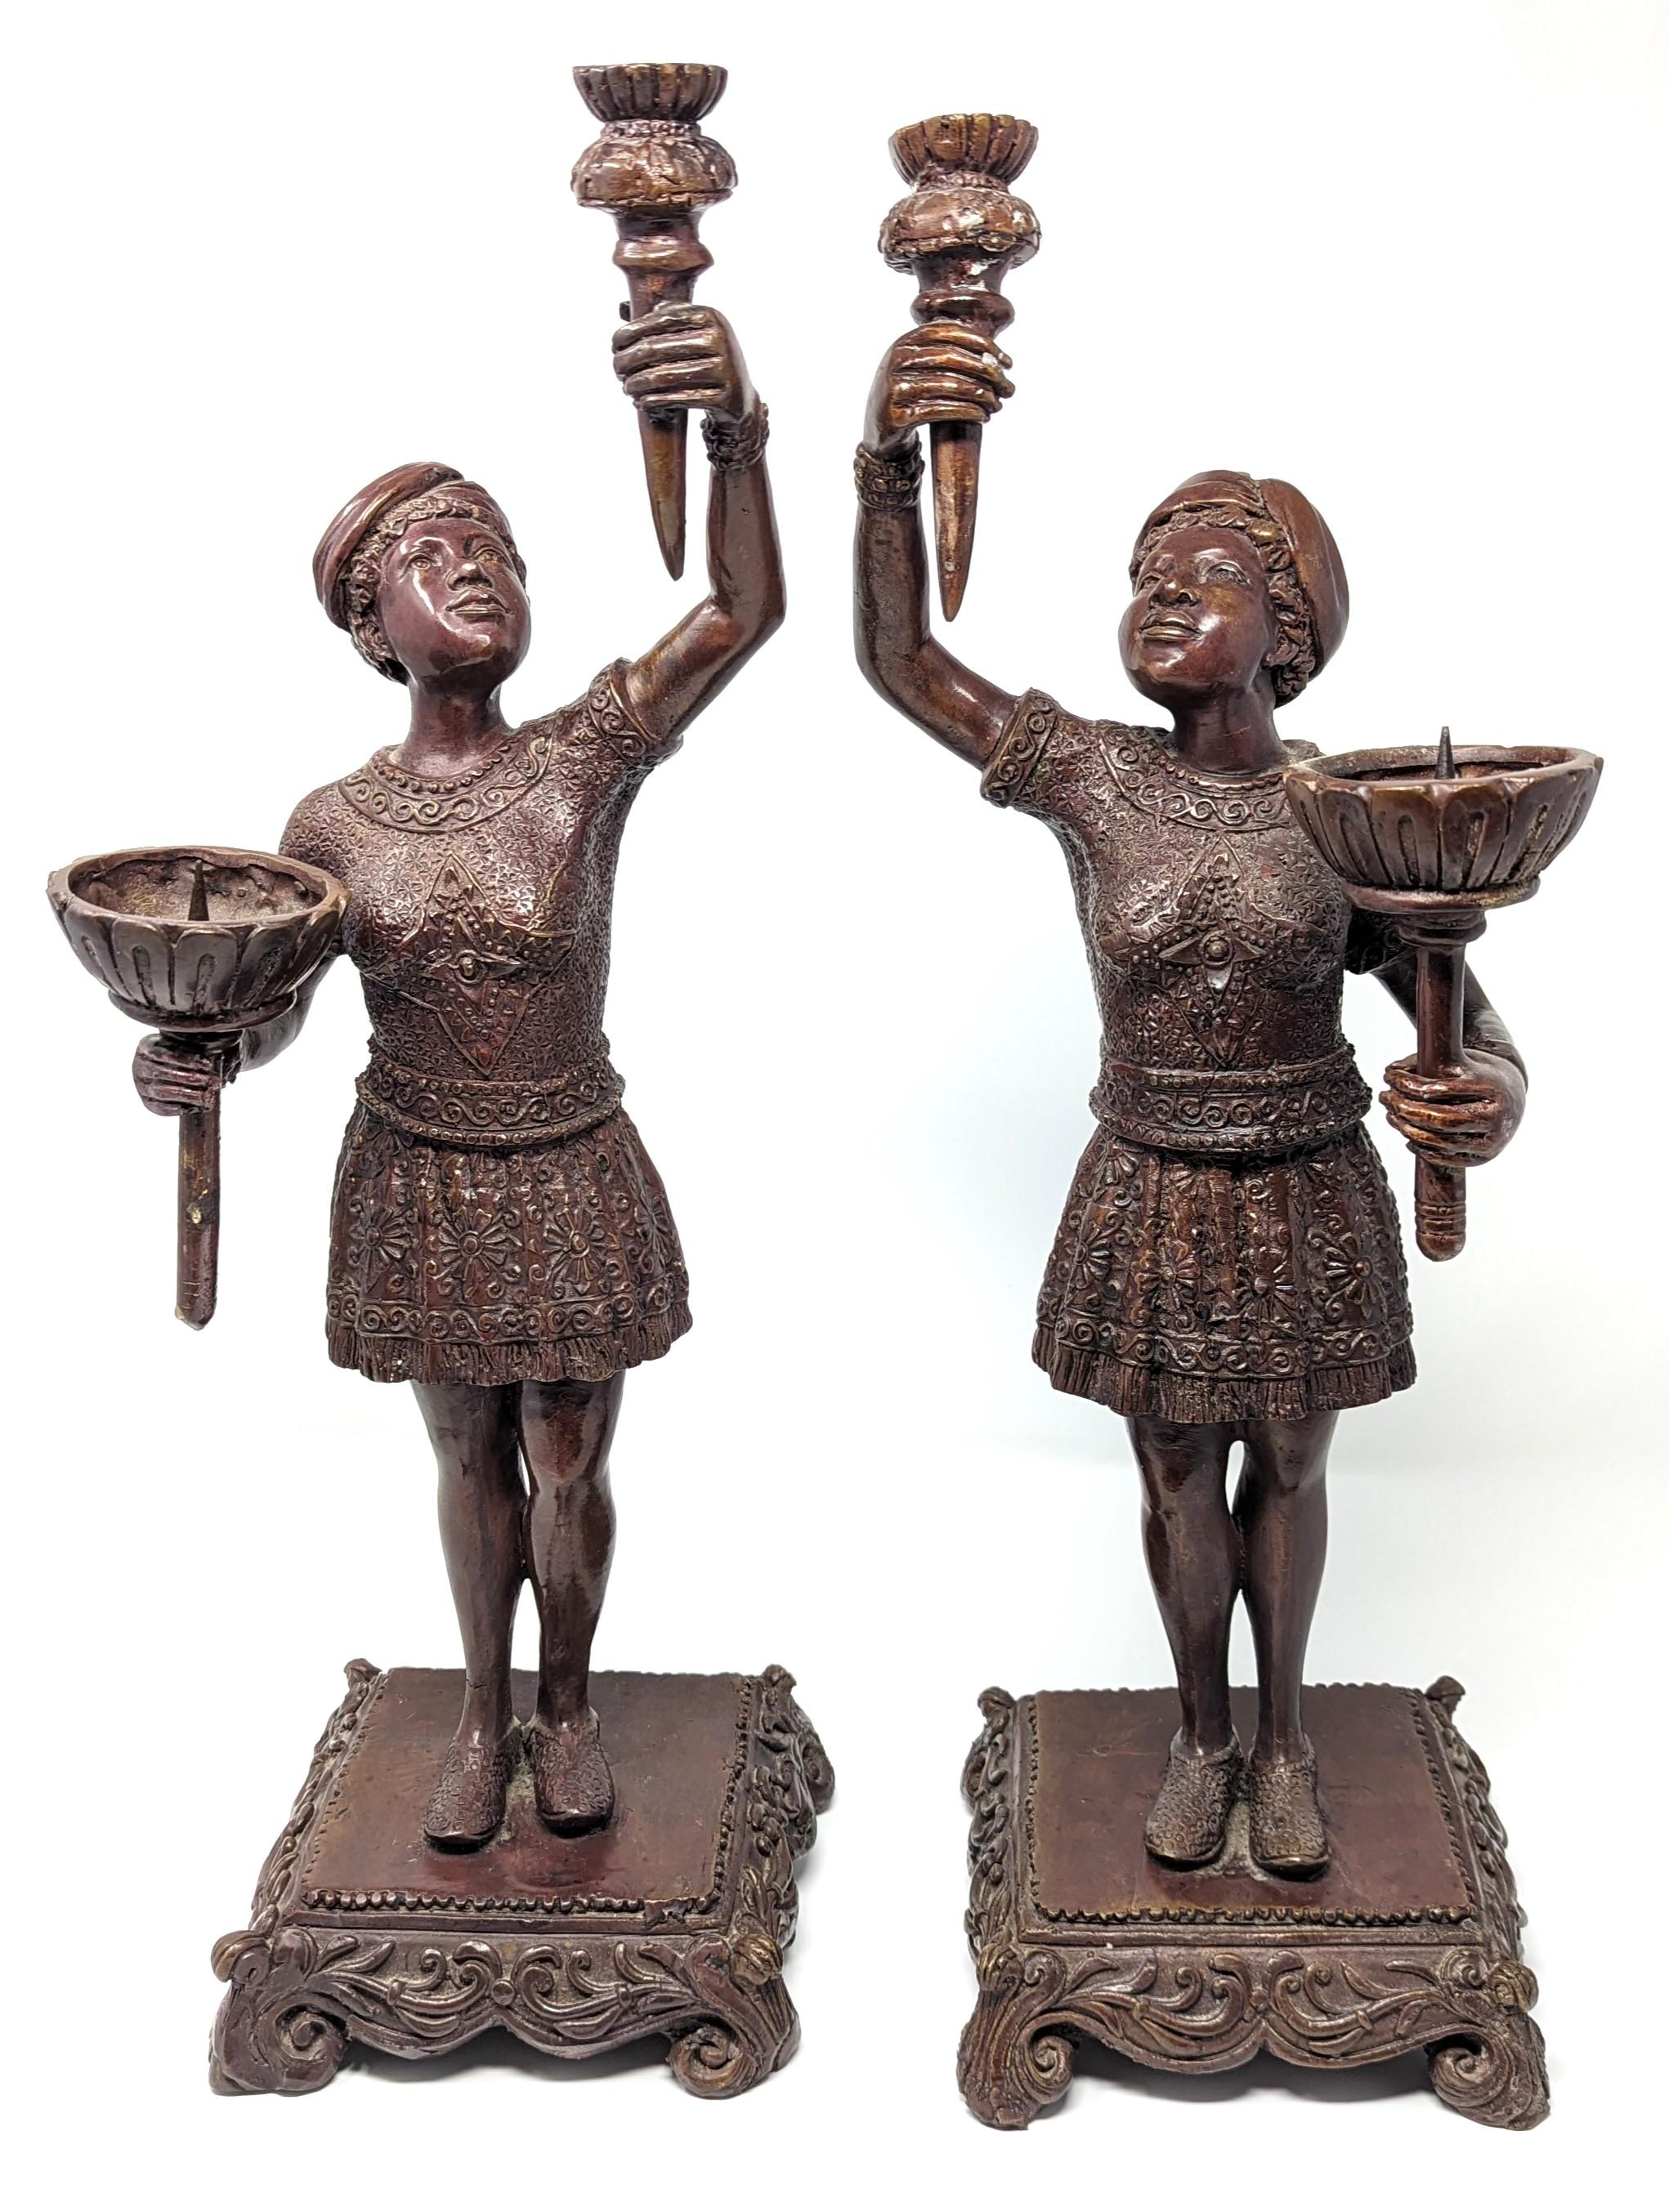 Beautiful pair of bronze candlesticks featuring an Olympic torch bearer. Made from high-quality bronze, making these a unique set to add to your home decor. Measures slightly under 19 inches in height with the base measuring 6 inches in width and 6